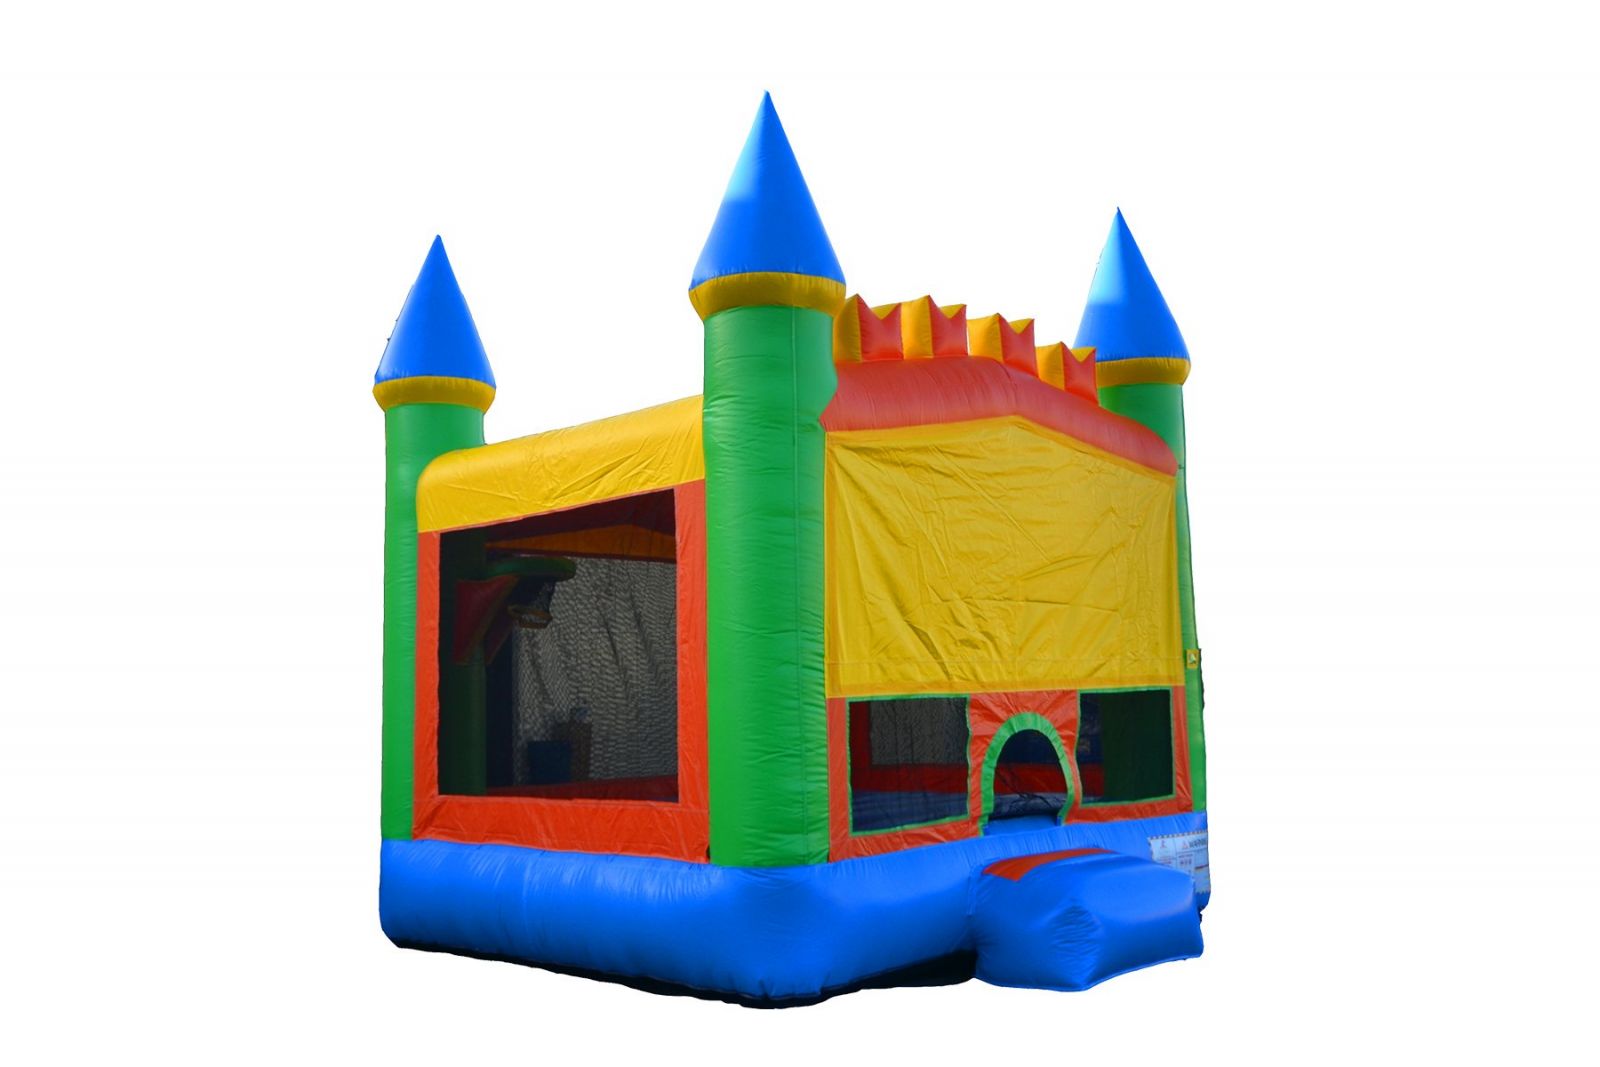 Bounce castle against white background